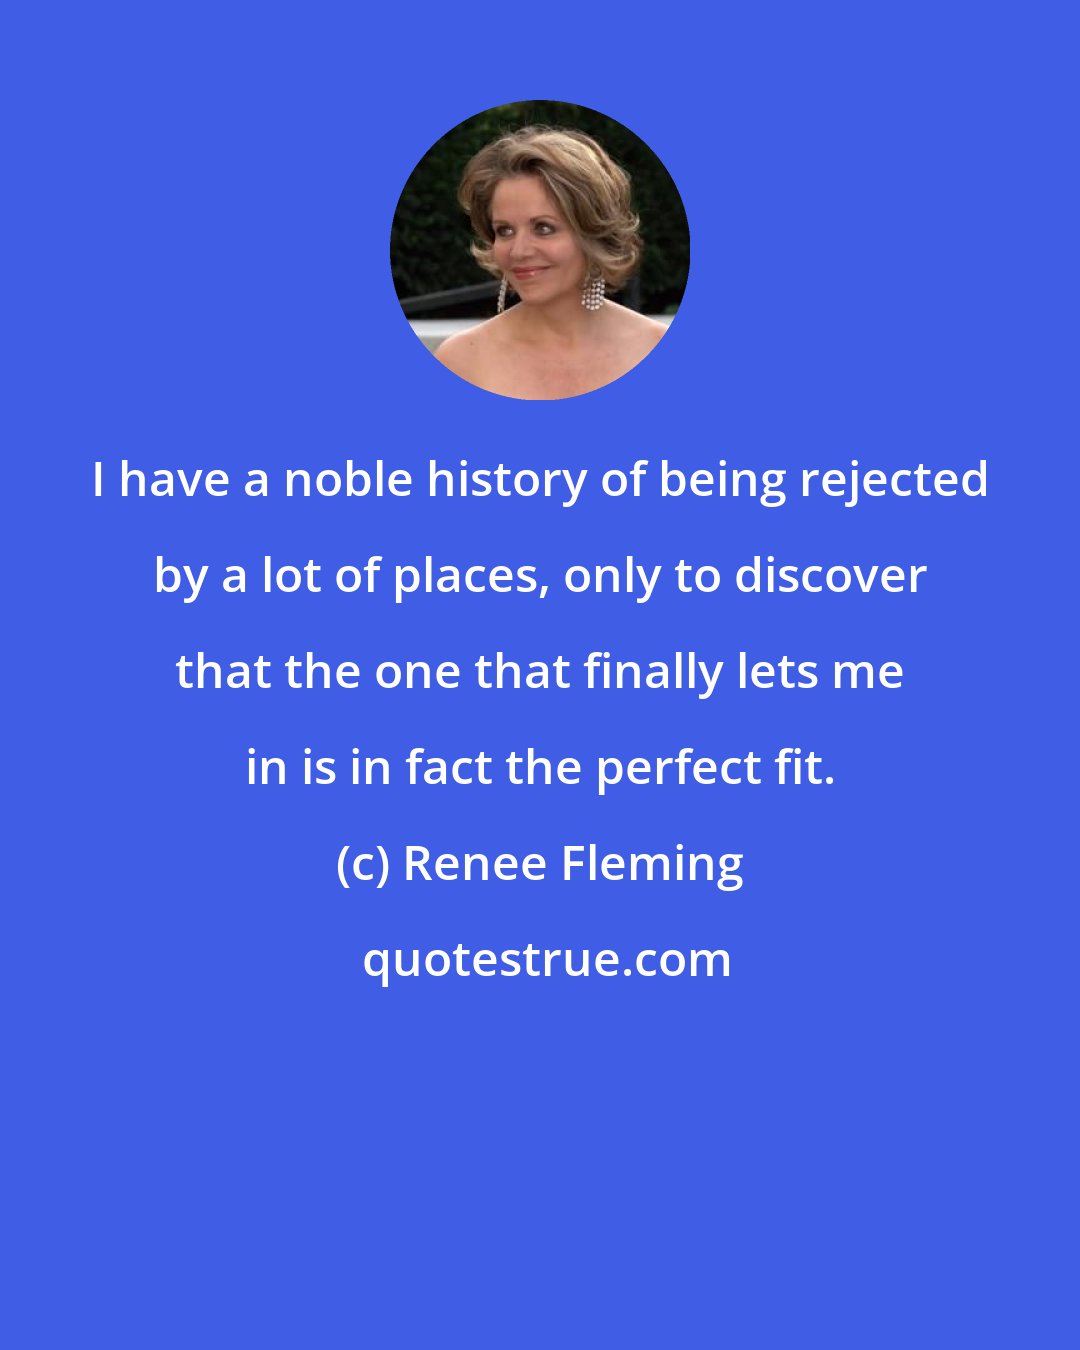 Renee Fleming: I have a noble history of being rejected by a lot of places, only to discover that the one that finally lets me in is in fact the perfect fit.